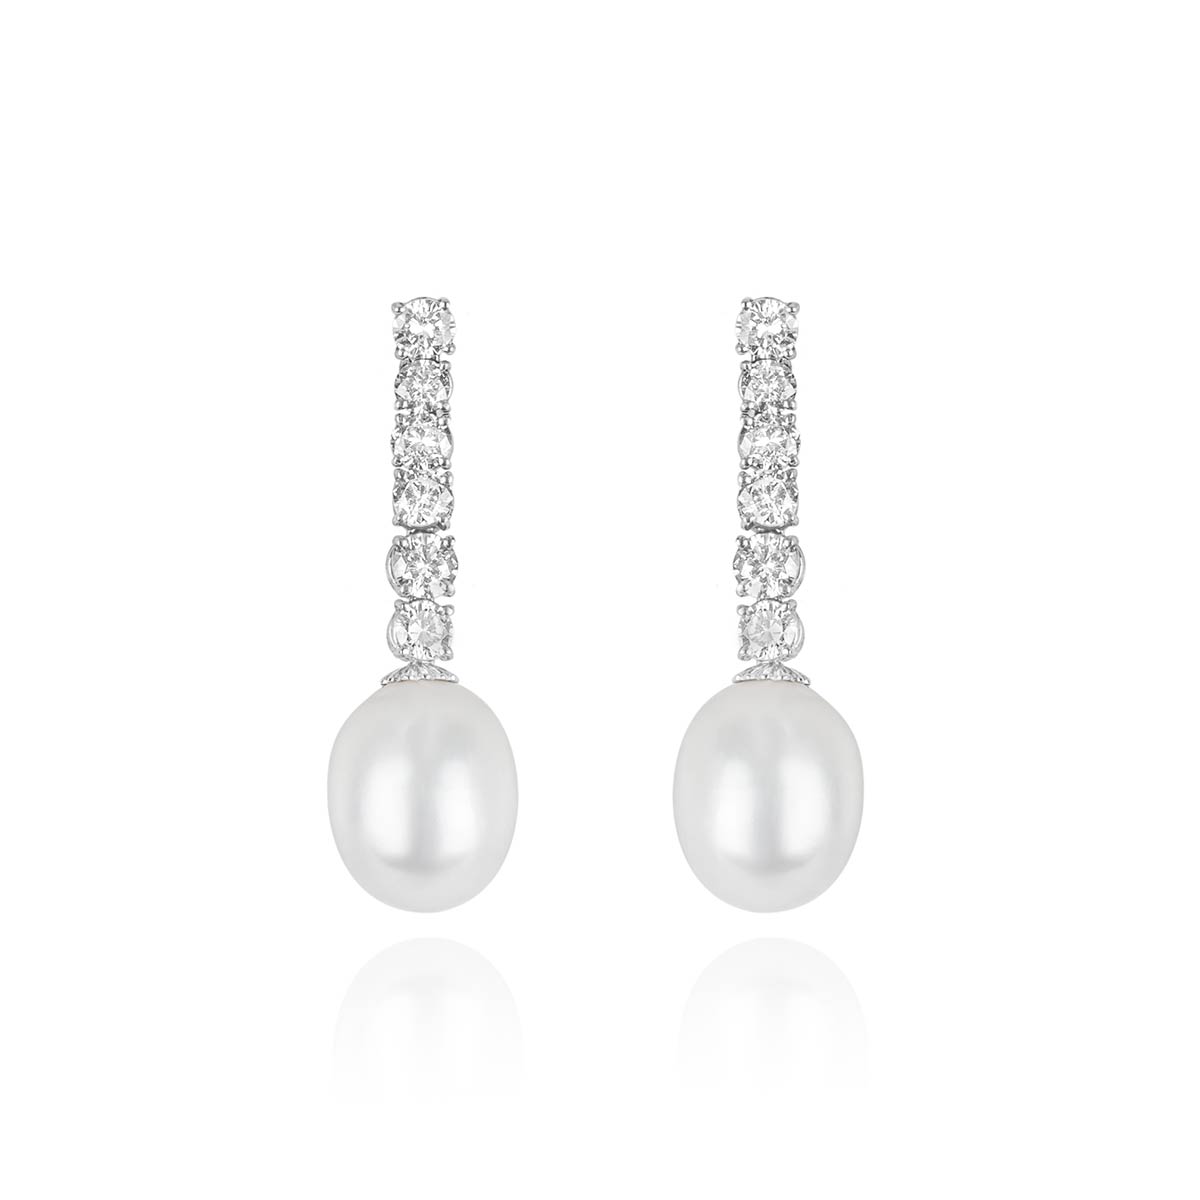 White Gold Diamond and Pearl Drop Earrings